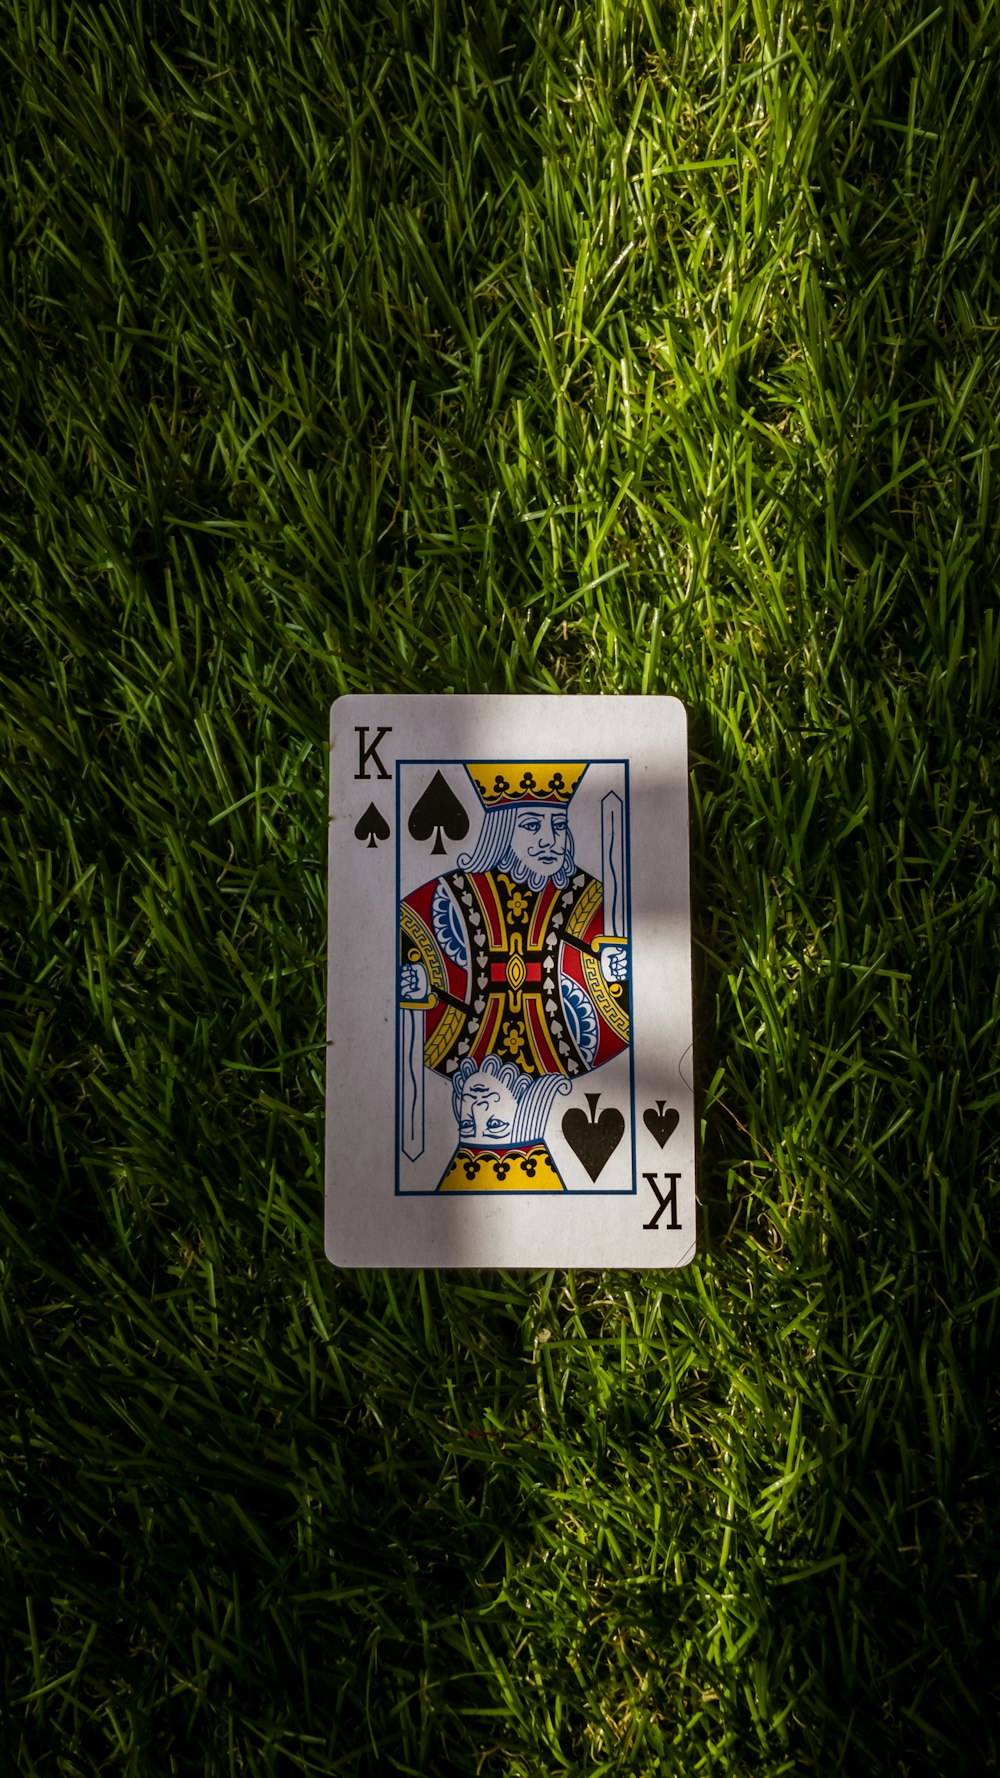 jack of spade playing card on green grass